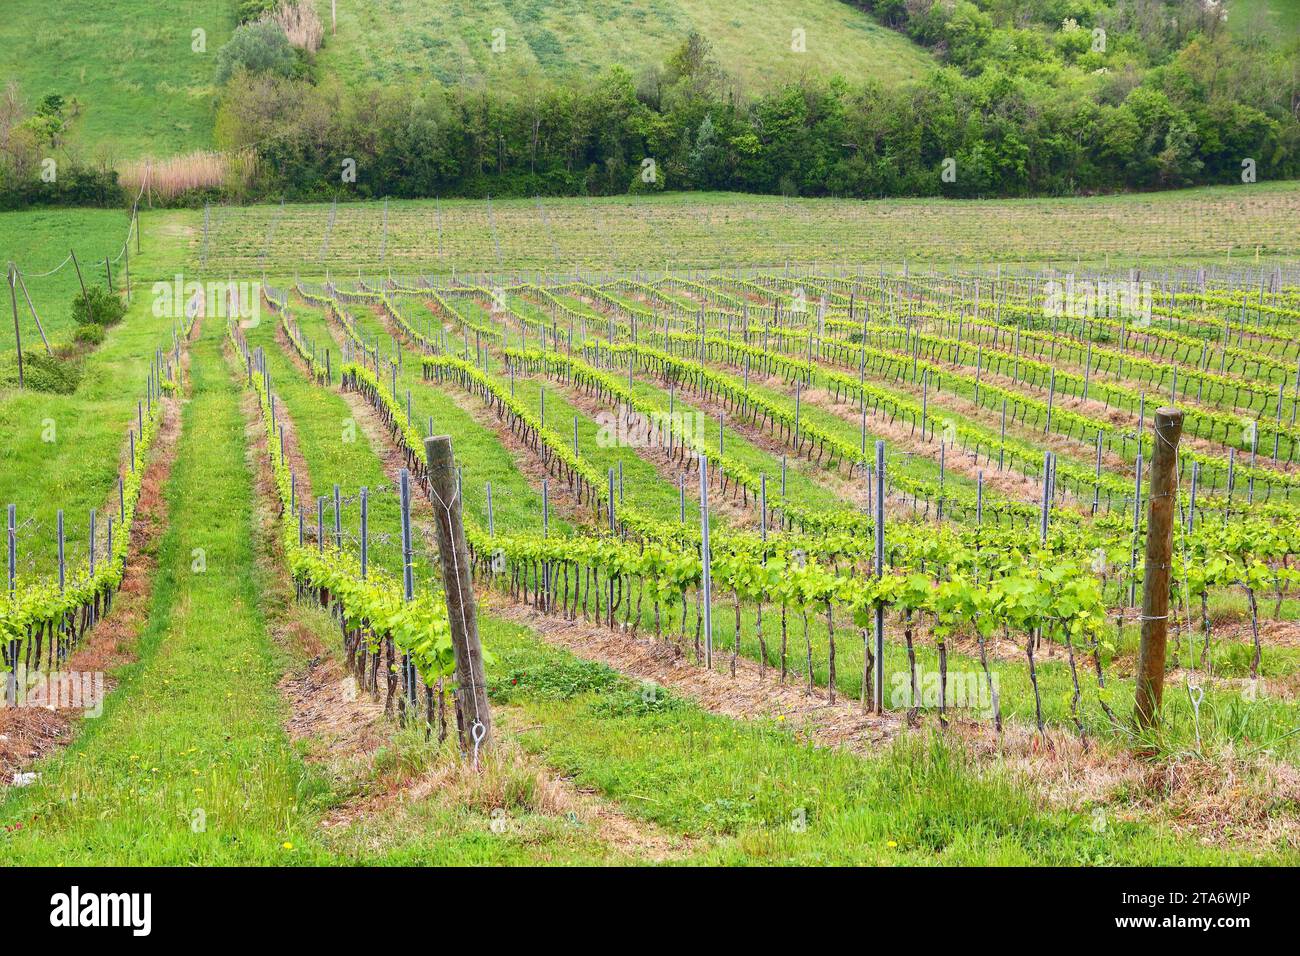 Vineyards in Tuscany - rural Italy. Agricultural countryside area in the province of Siena. Stock Photo